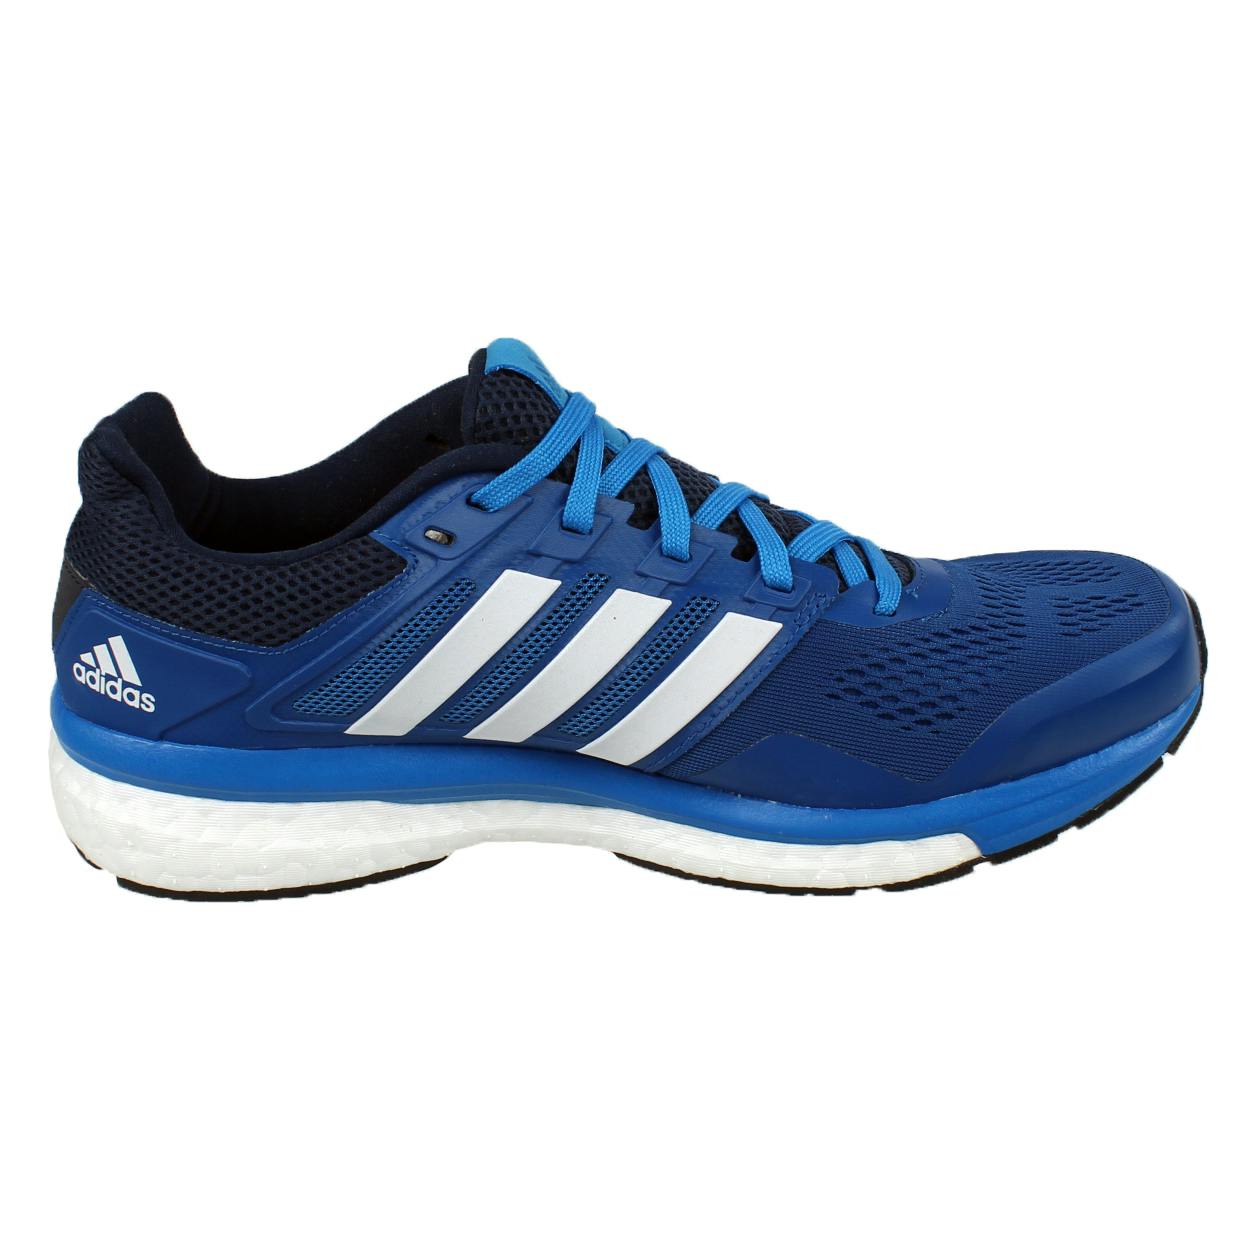 legaal Vertrappen Opwekking Adidas Supernova Boost 8 Factory Shop, 48% OFF | maikyaulaw.com